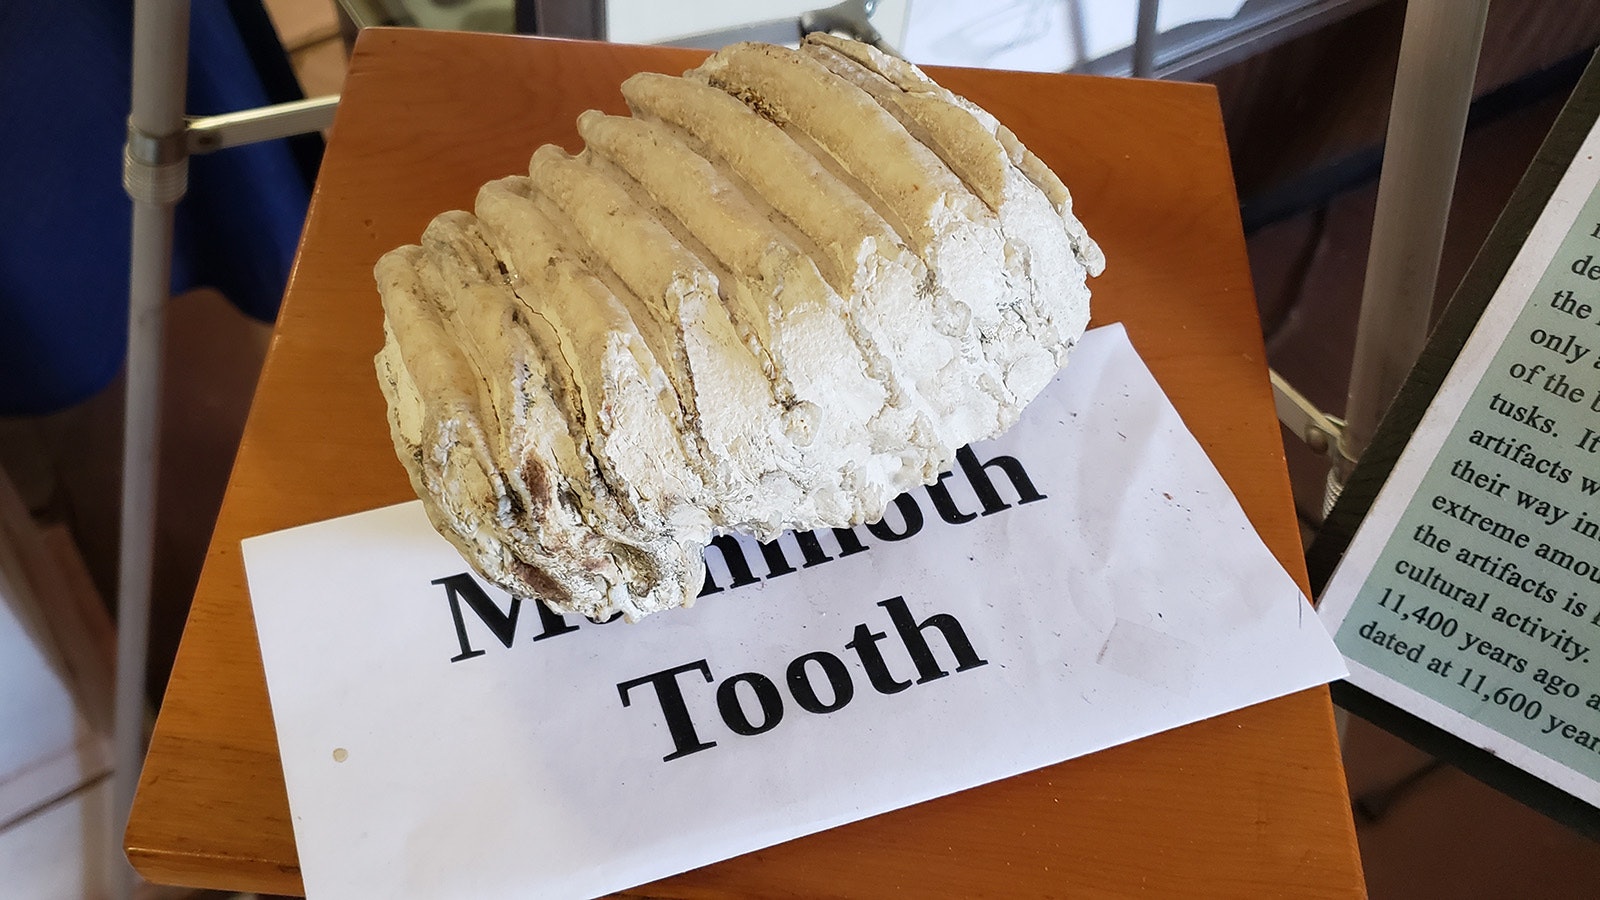 A mammoth tooth on display in the YMCA at Sunrise.